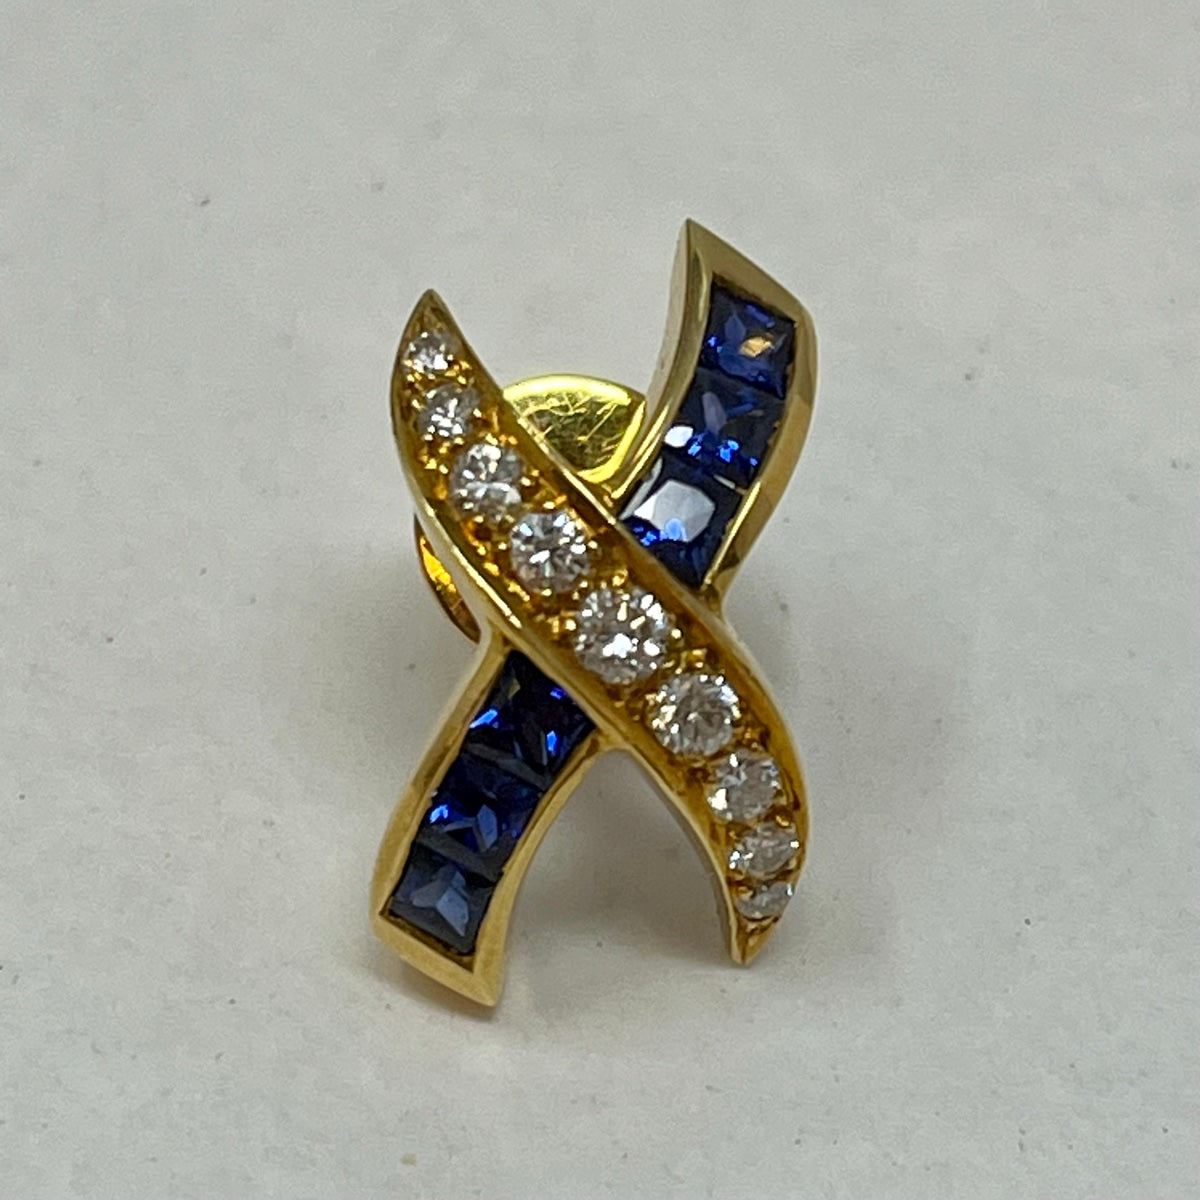 18K Gold "X" Earrings with Diamonds and Sapphires